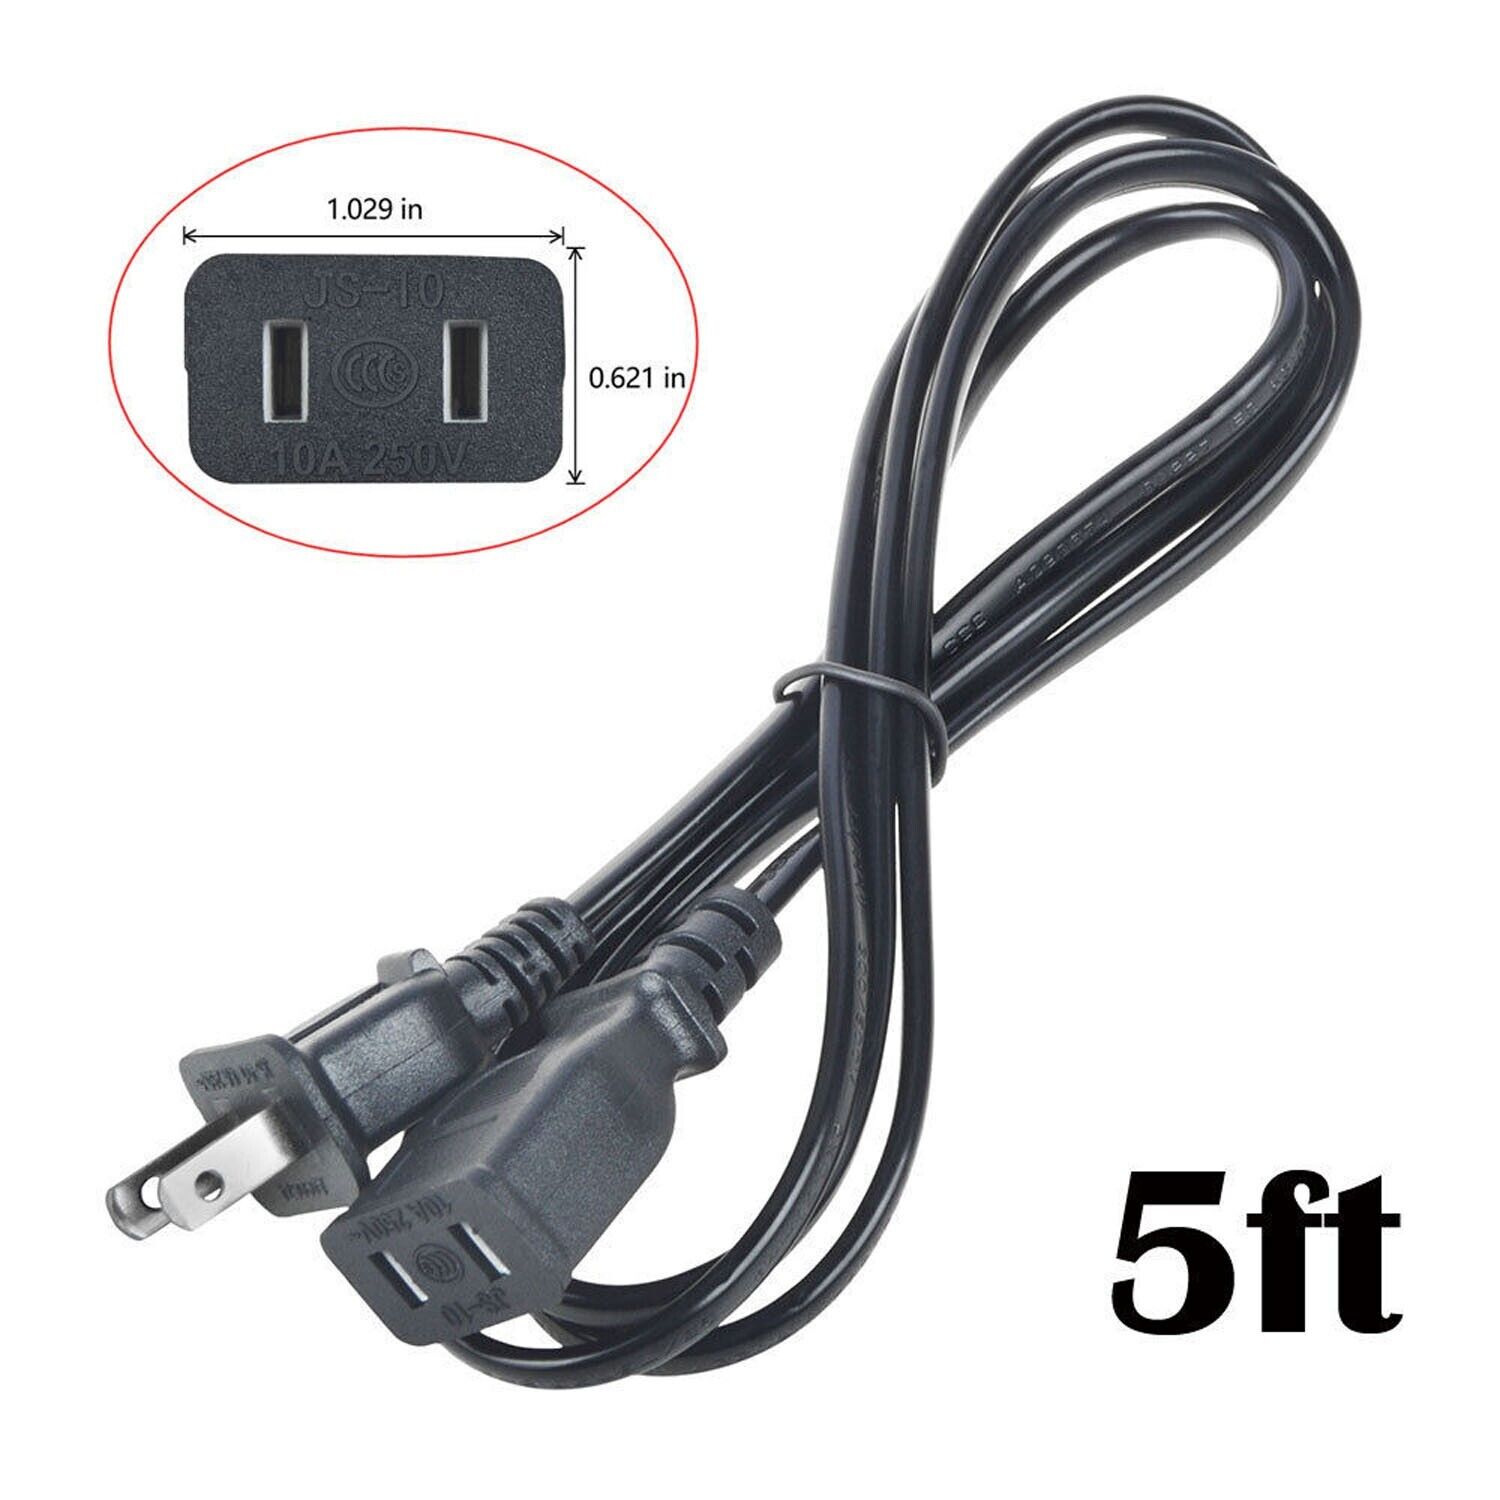 5FT AC Power Charger Cord for Station PSX3 PS X3 Power Station Jump Starter